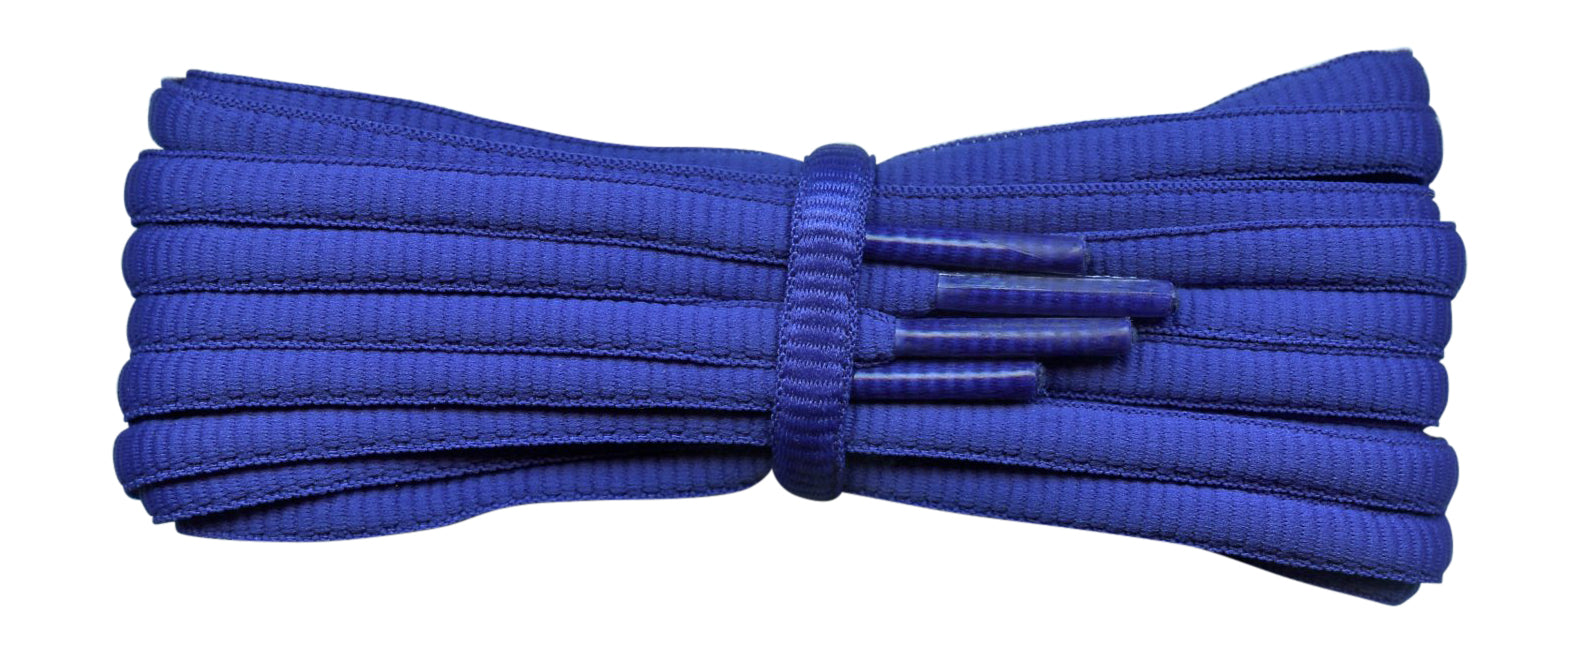 Fabmania oval sports shoe laces in royal blue